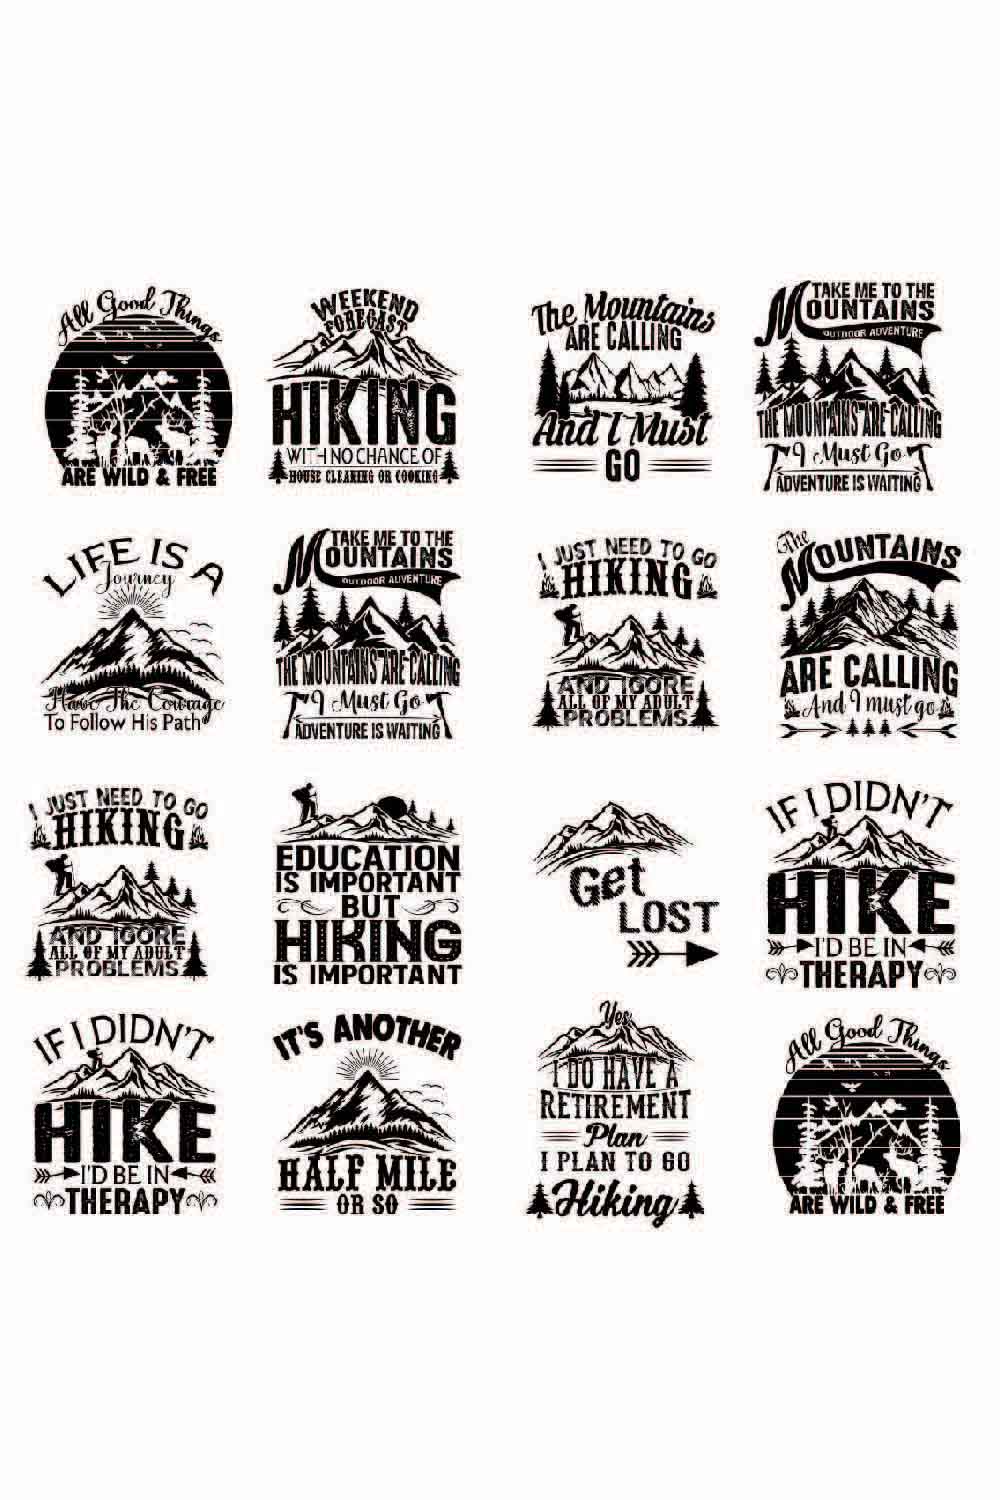 Hiking Saying & quotes, SVG T-Shirt Design |The Mountains are calling and I must go, Retro It's All About Jesus Typography Tshirt Design | Ai, Svg, Eps, Dxf, Jpeg, Png, Instant download T-Shirt | 100% print-ready Digital vector file pinterest preview image.